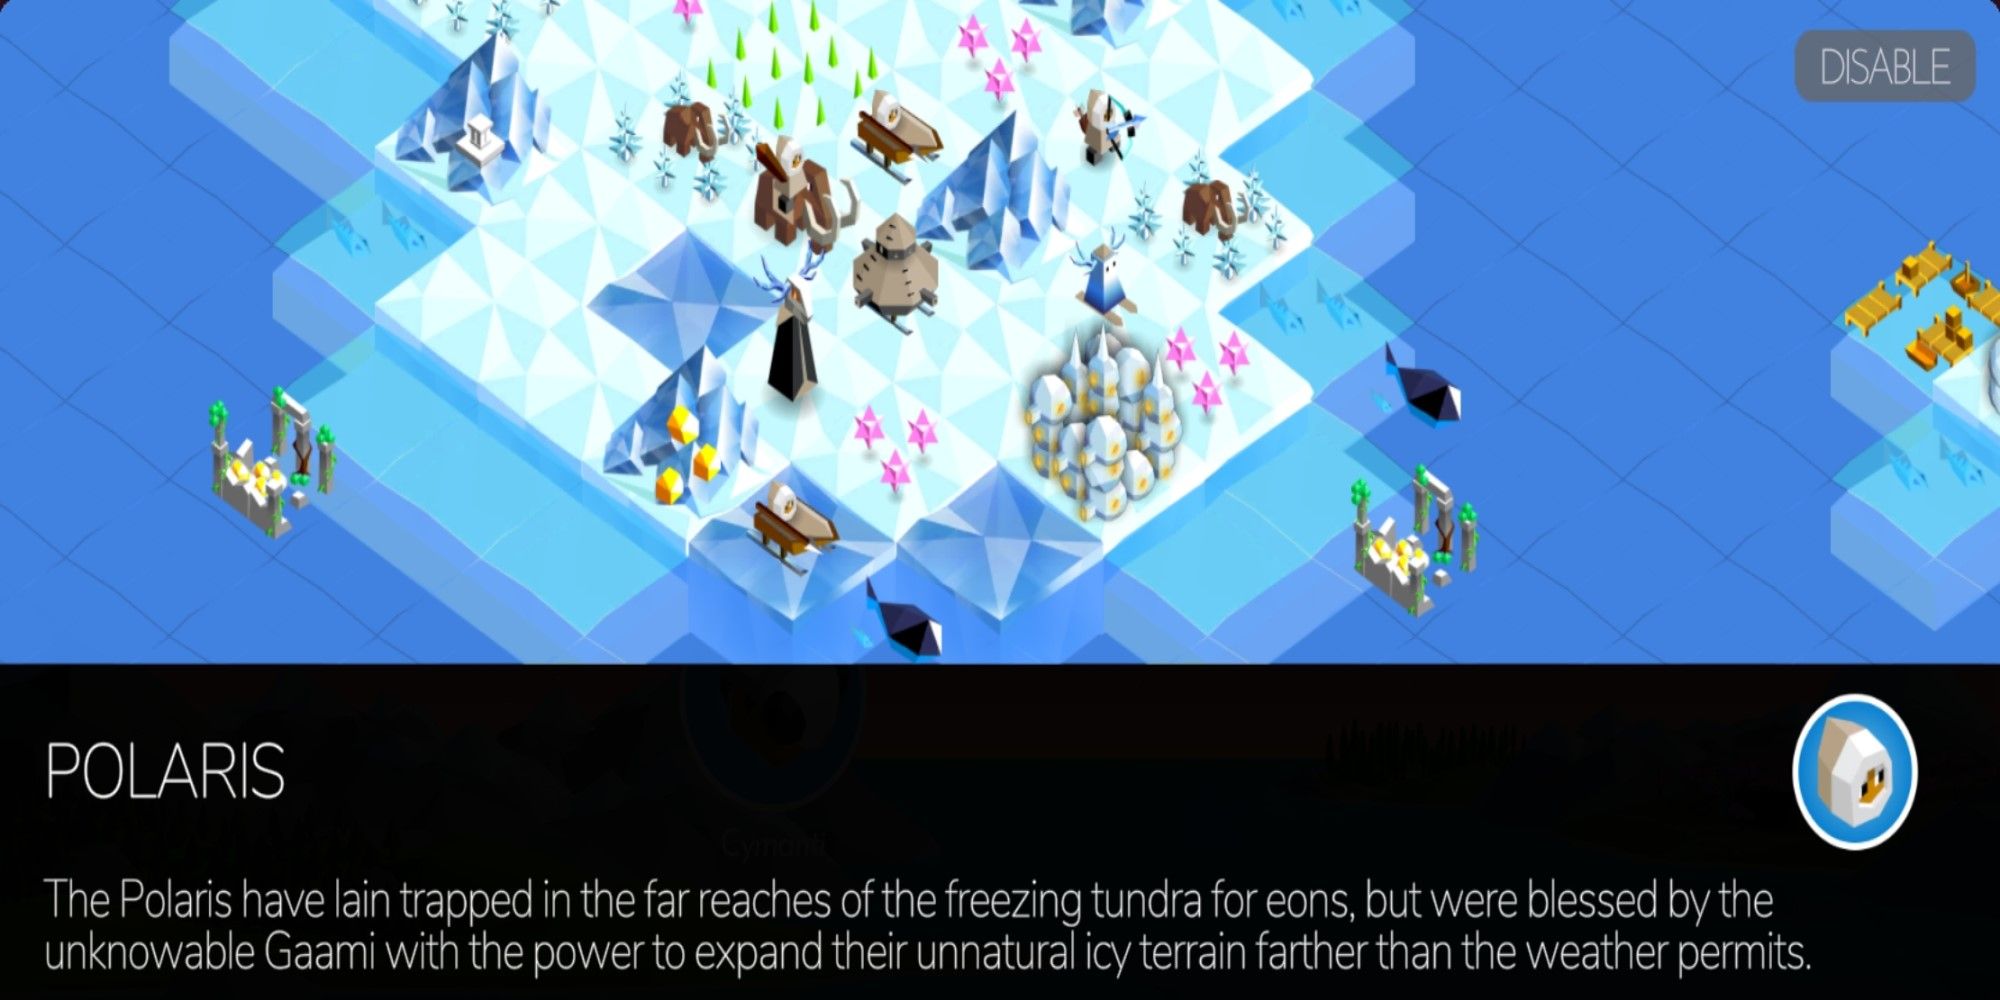 Information on the Polaris Tribe from Battle of Polytopia.